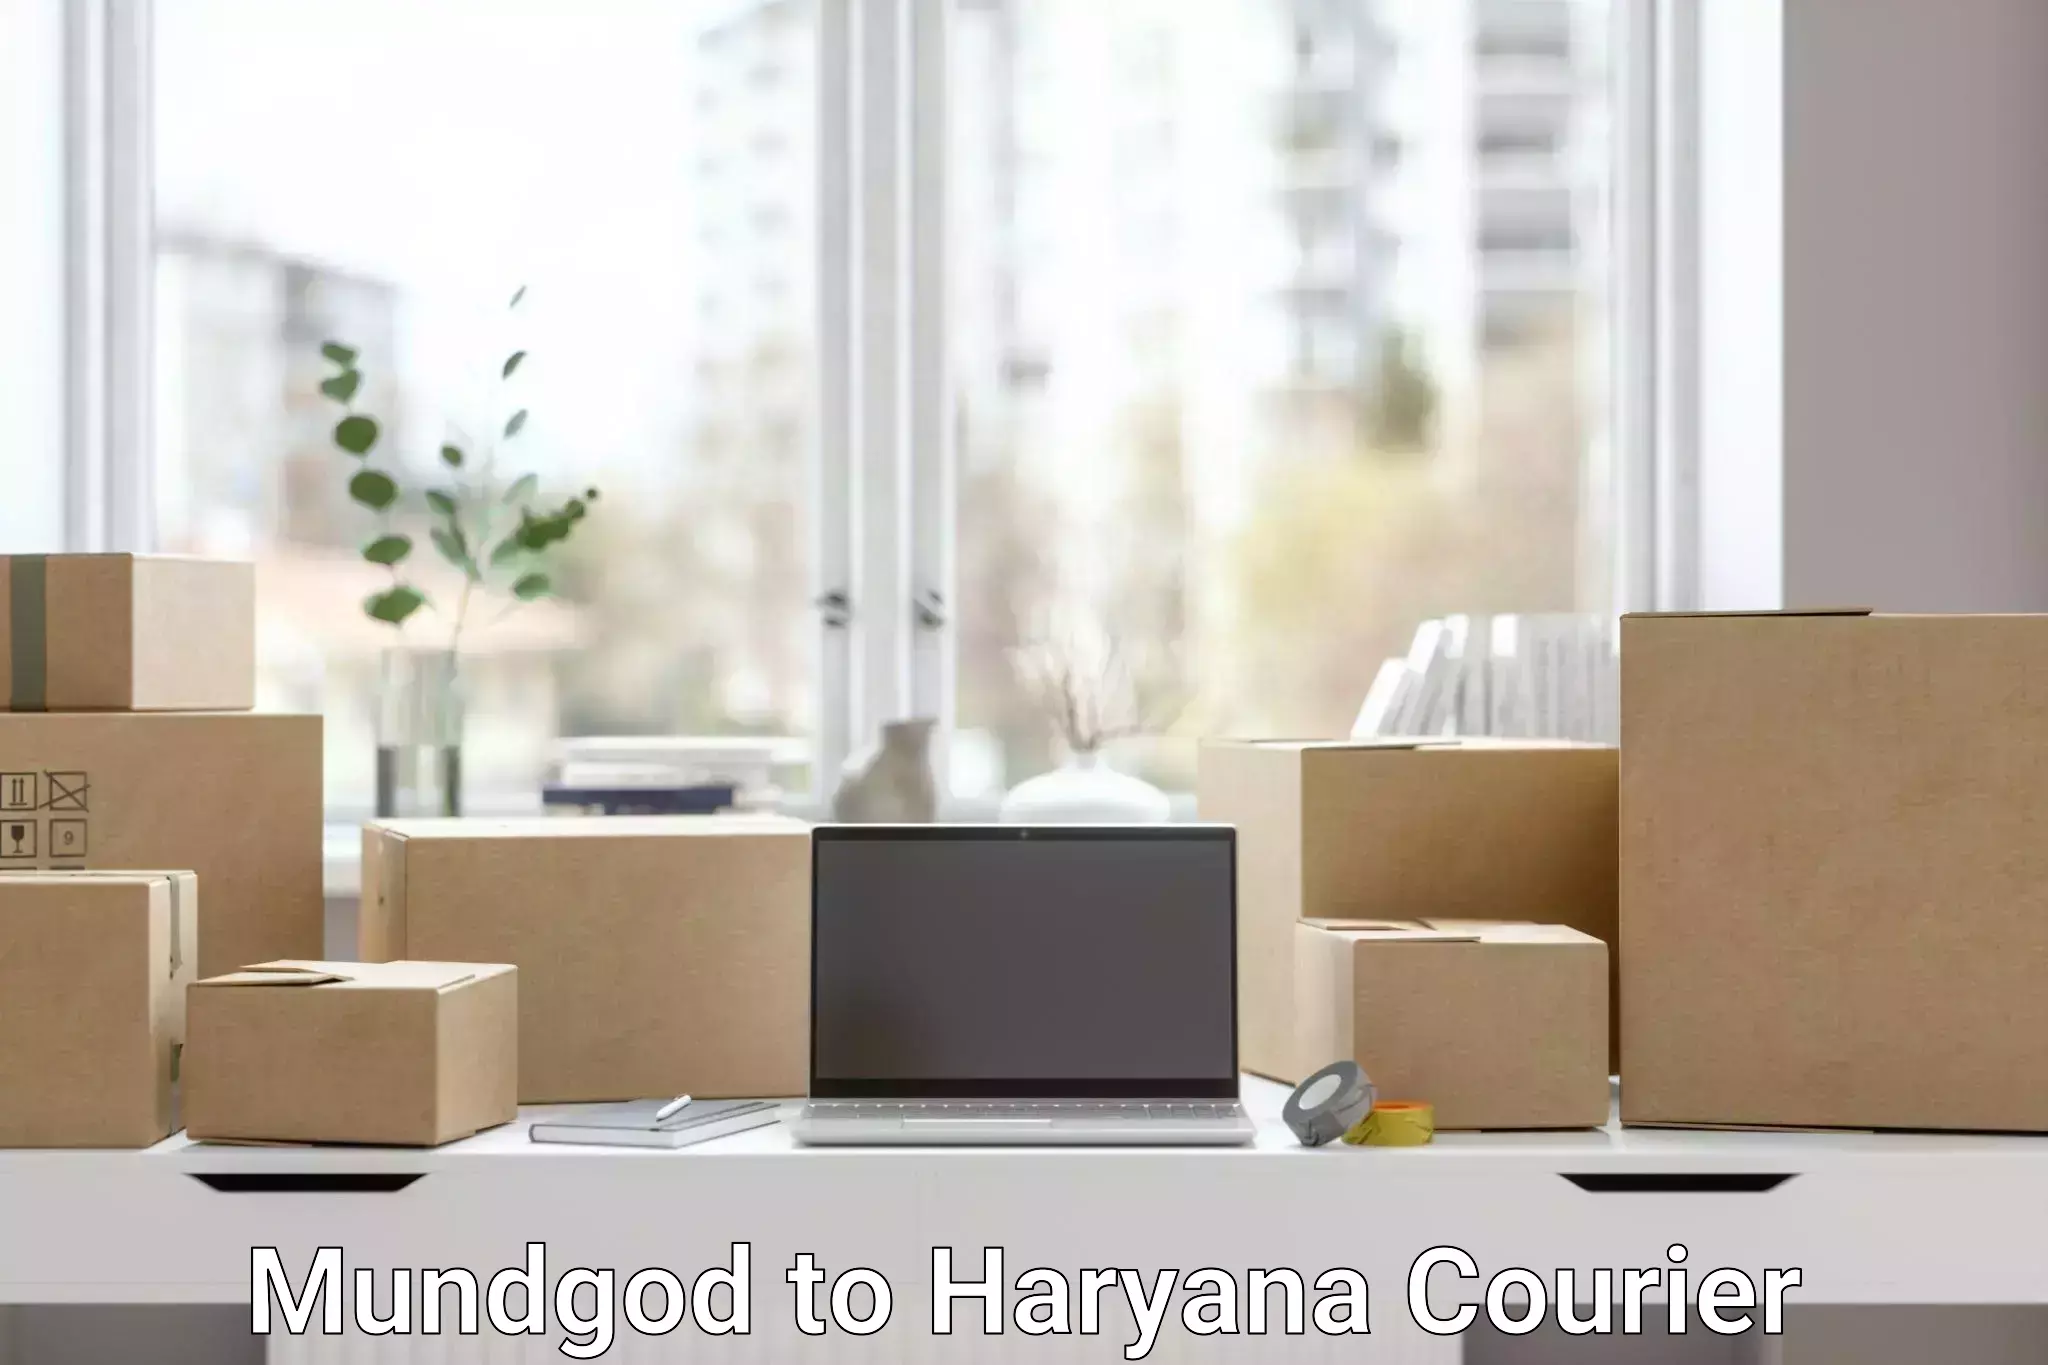 Package delivery network Mundgod to Haryana